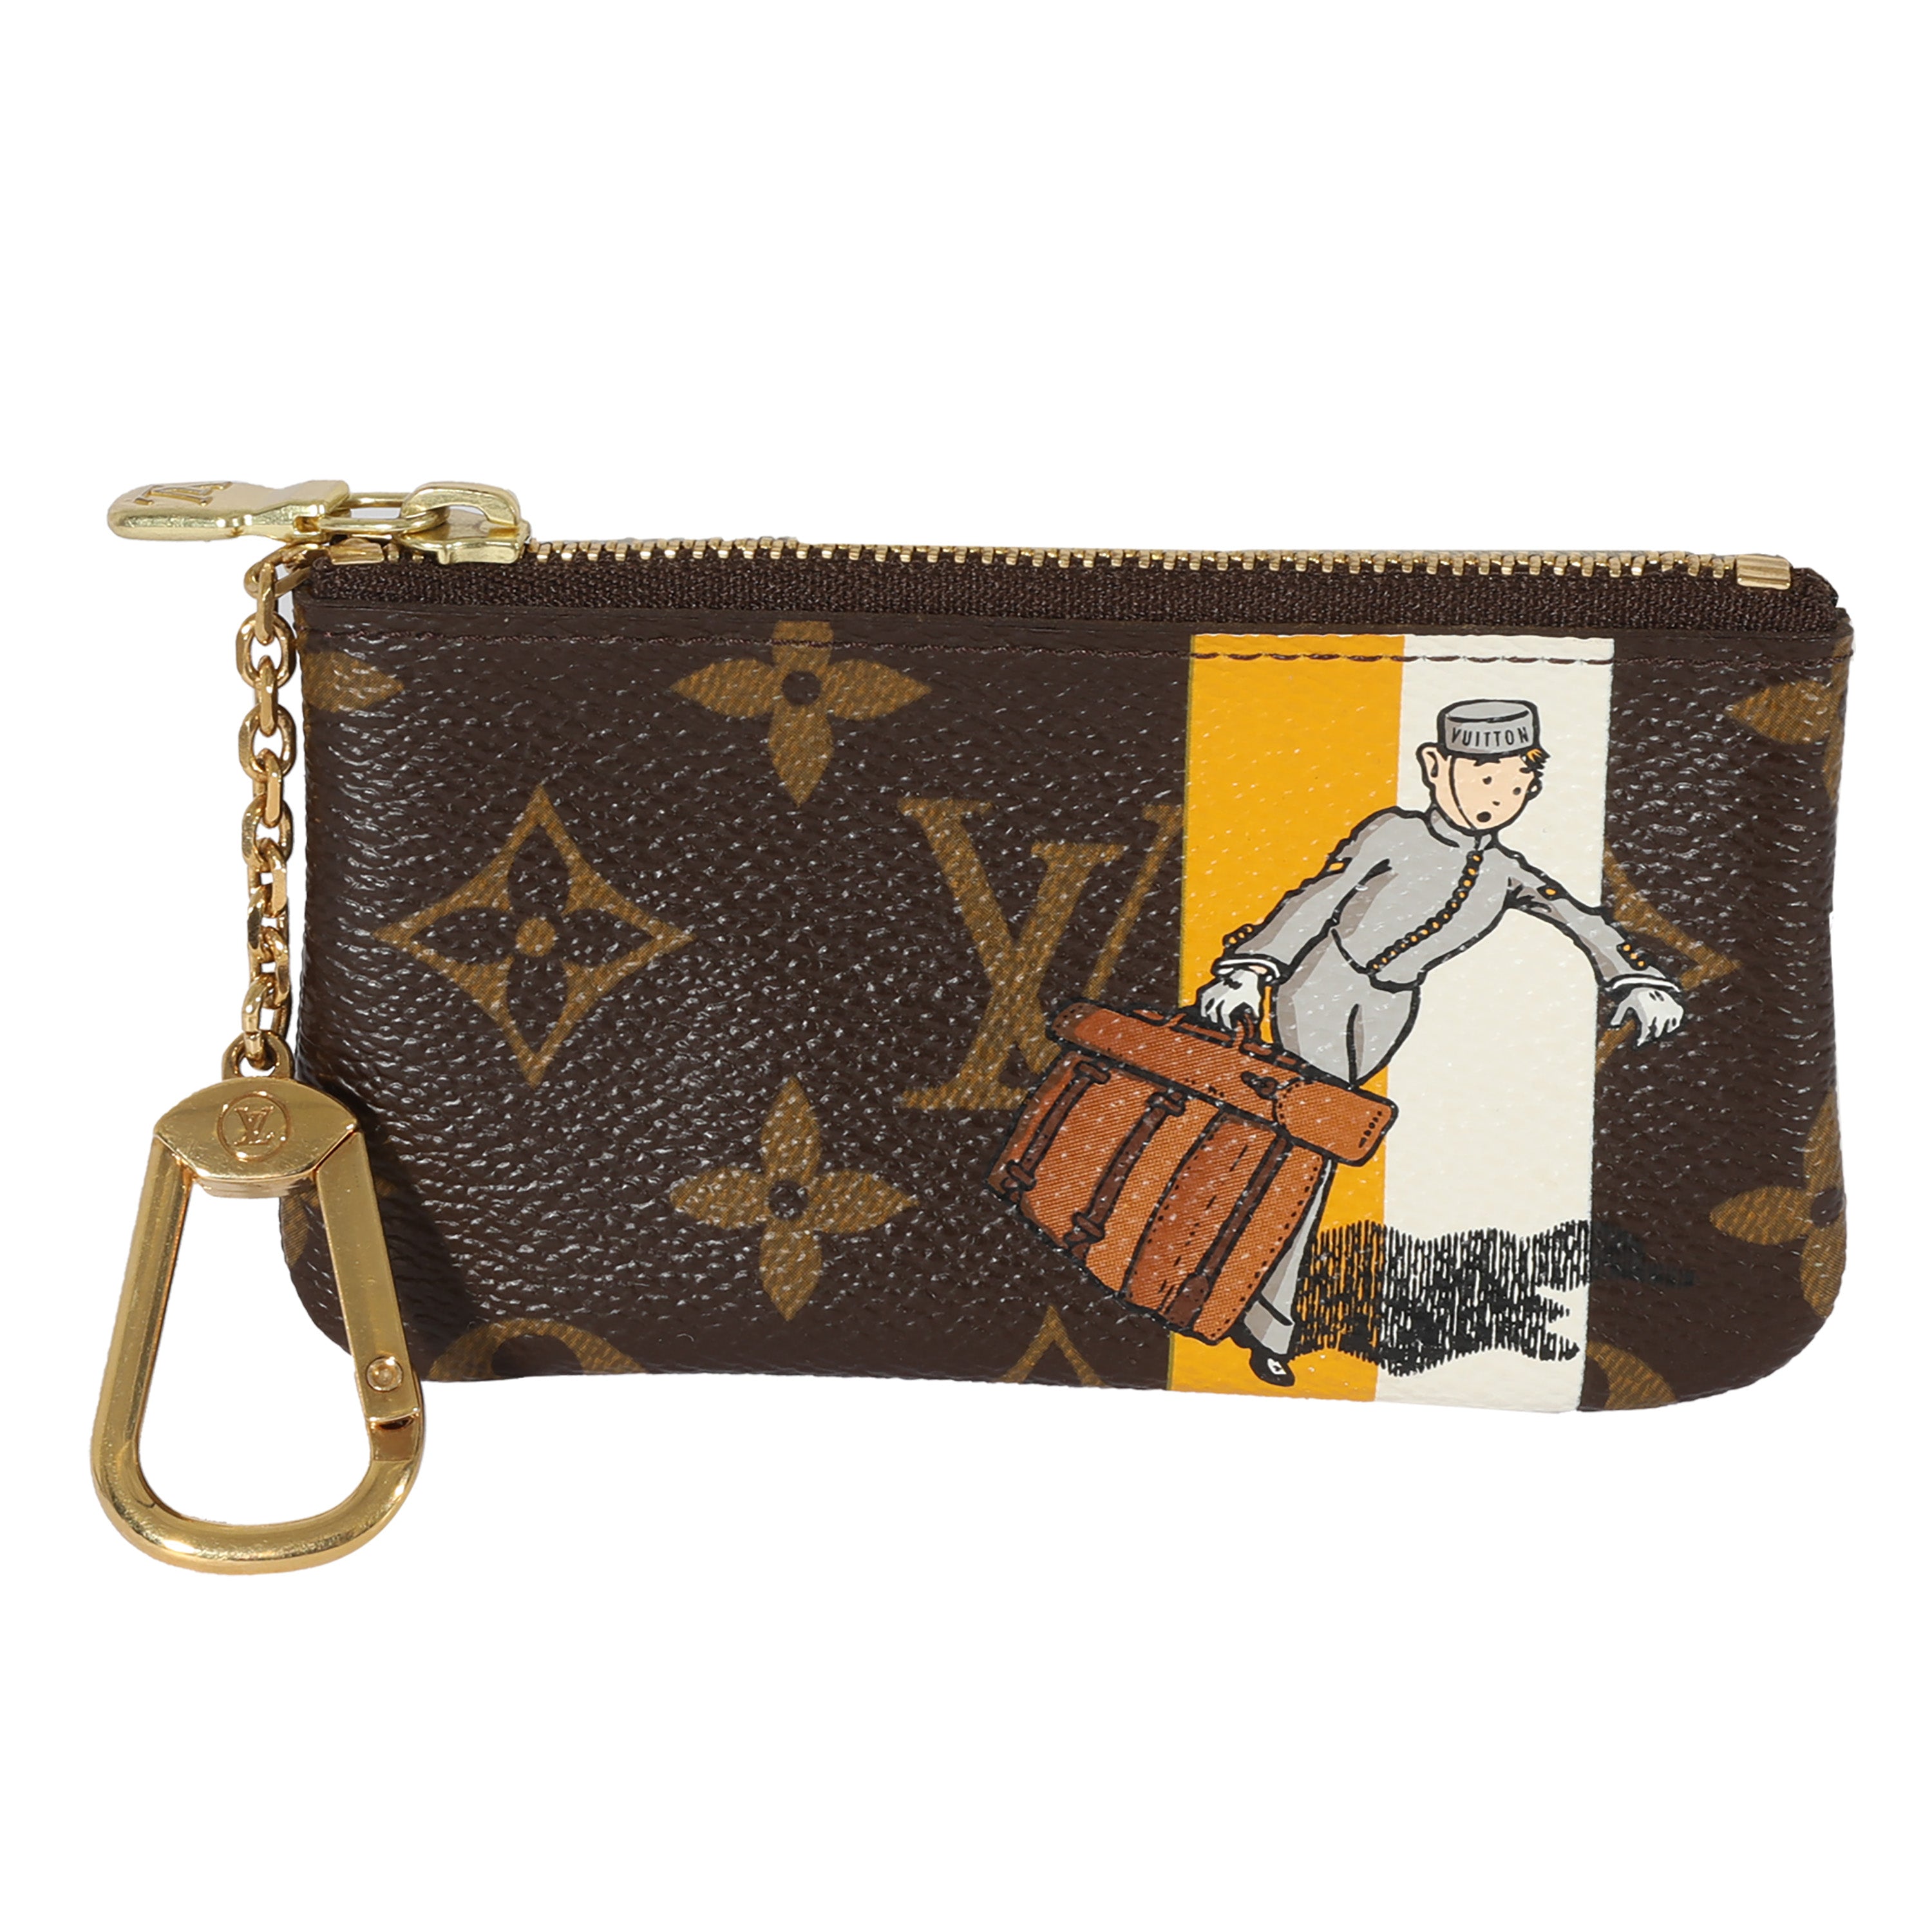 LOUIS VUITTON KEY POUCH REVIEW, WHAT FITS